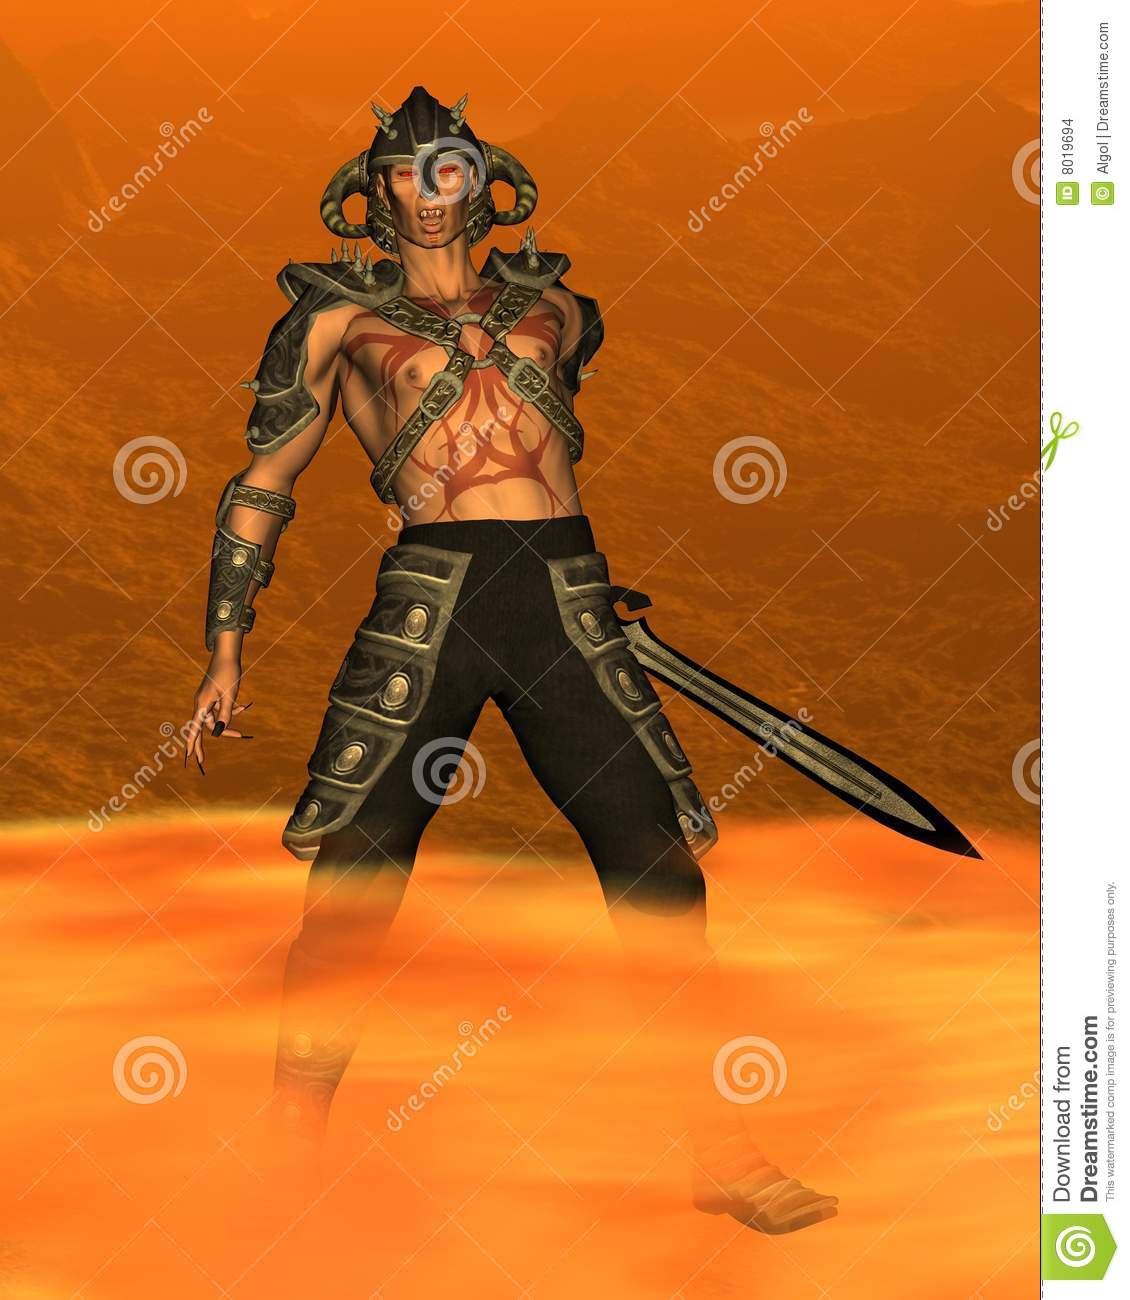 More Similar Stock Images Of   Demon Warrior With Fiery Background